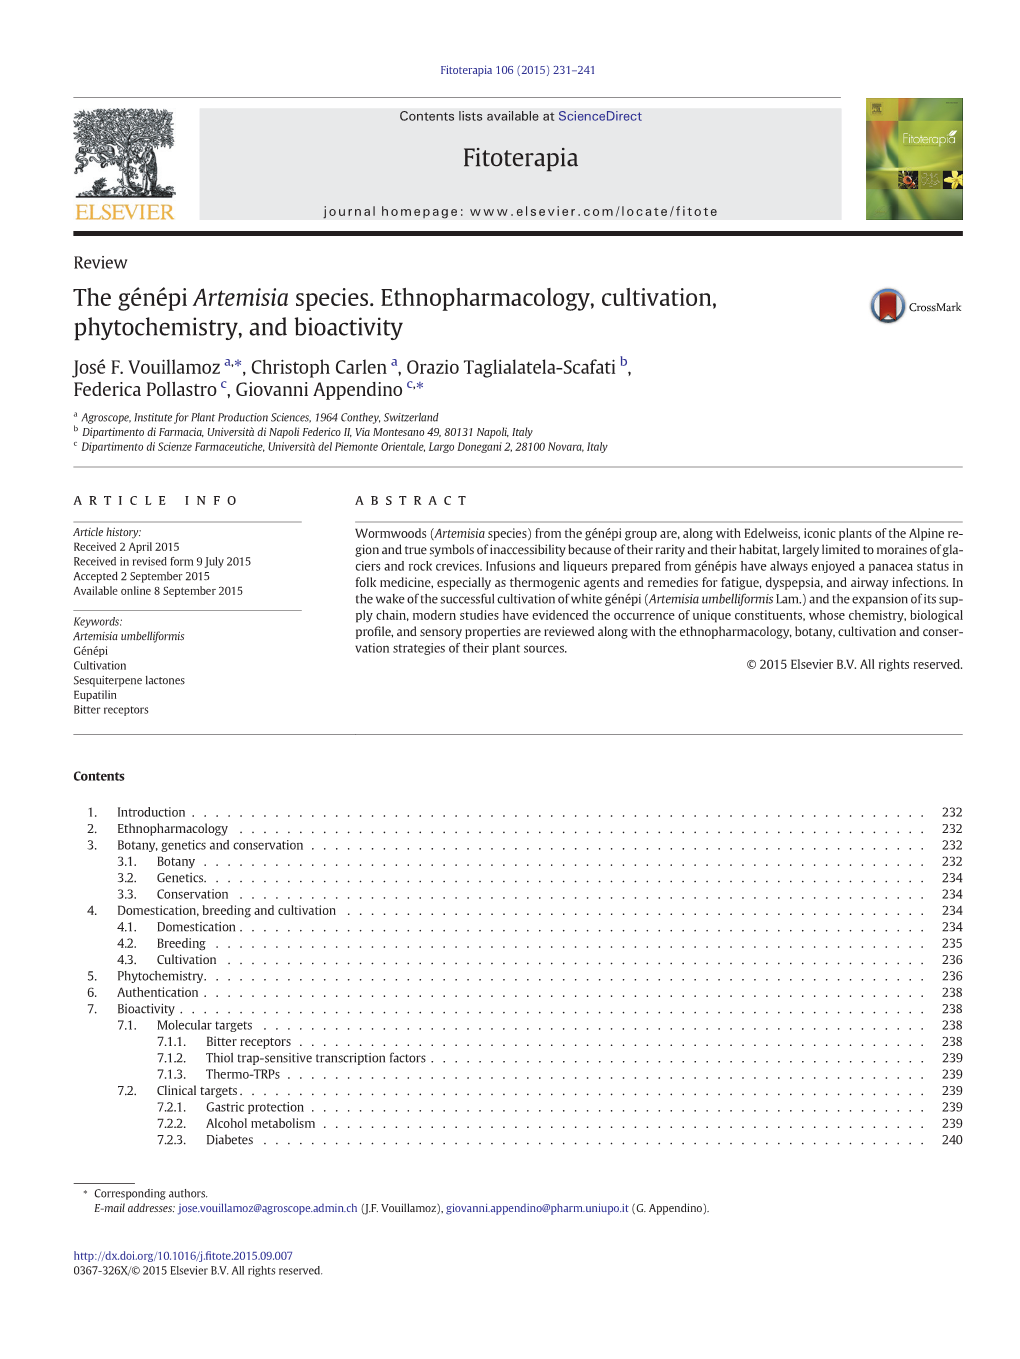 The Génépi Artemisia Species. Ethnopharmacology, Cultivation, Phytochemistry, and Bioactivity